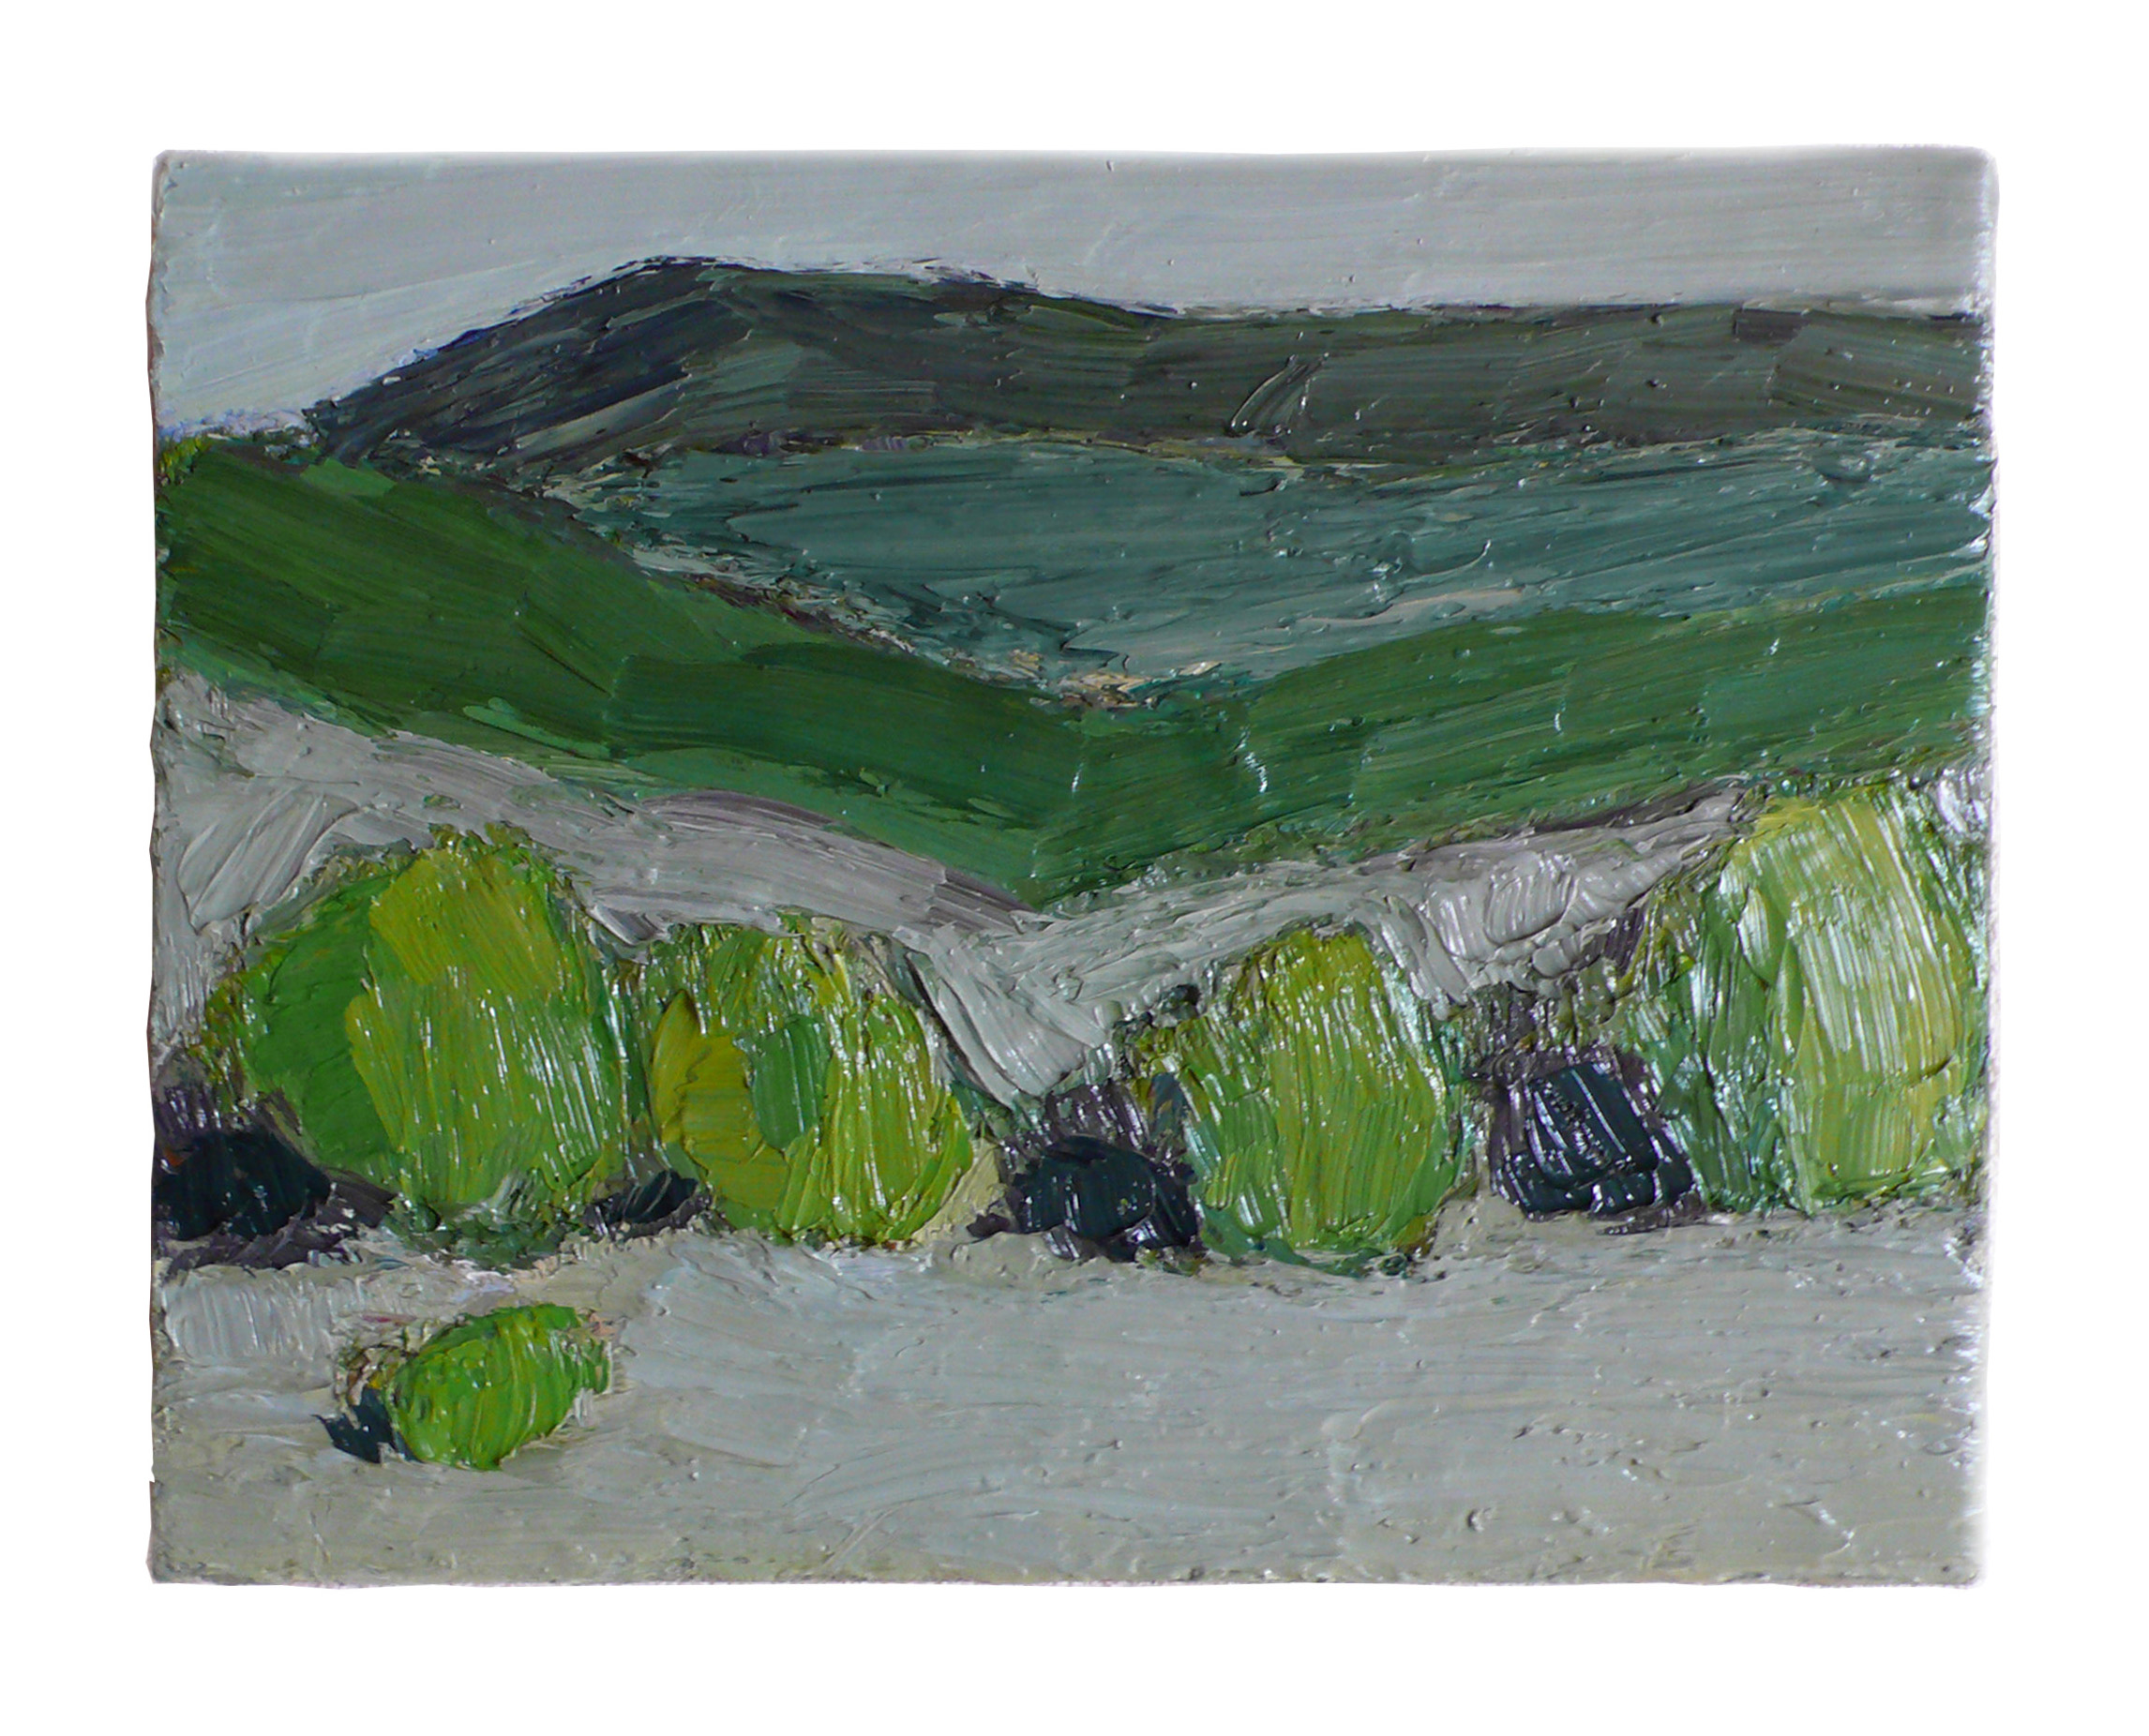 2011   bushes and mountains   28 x 35cm   oil on canvas